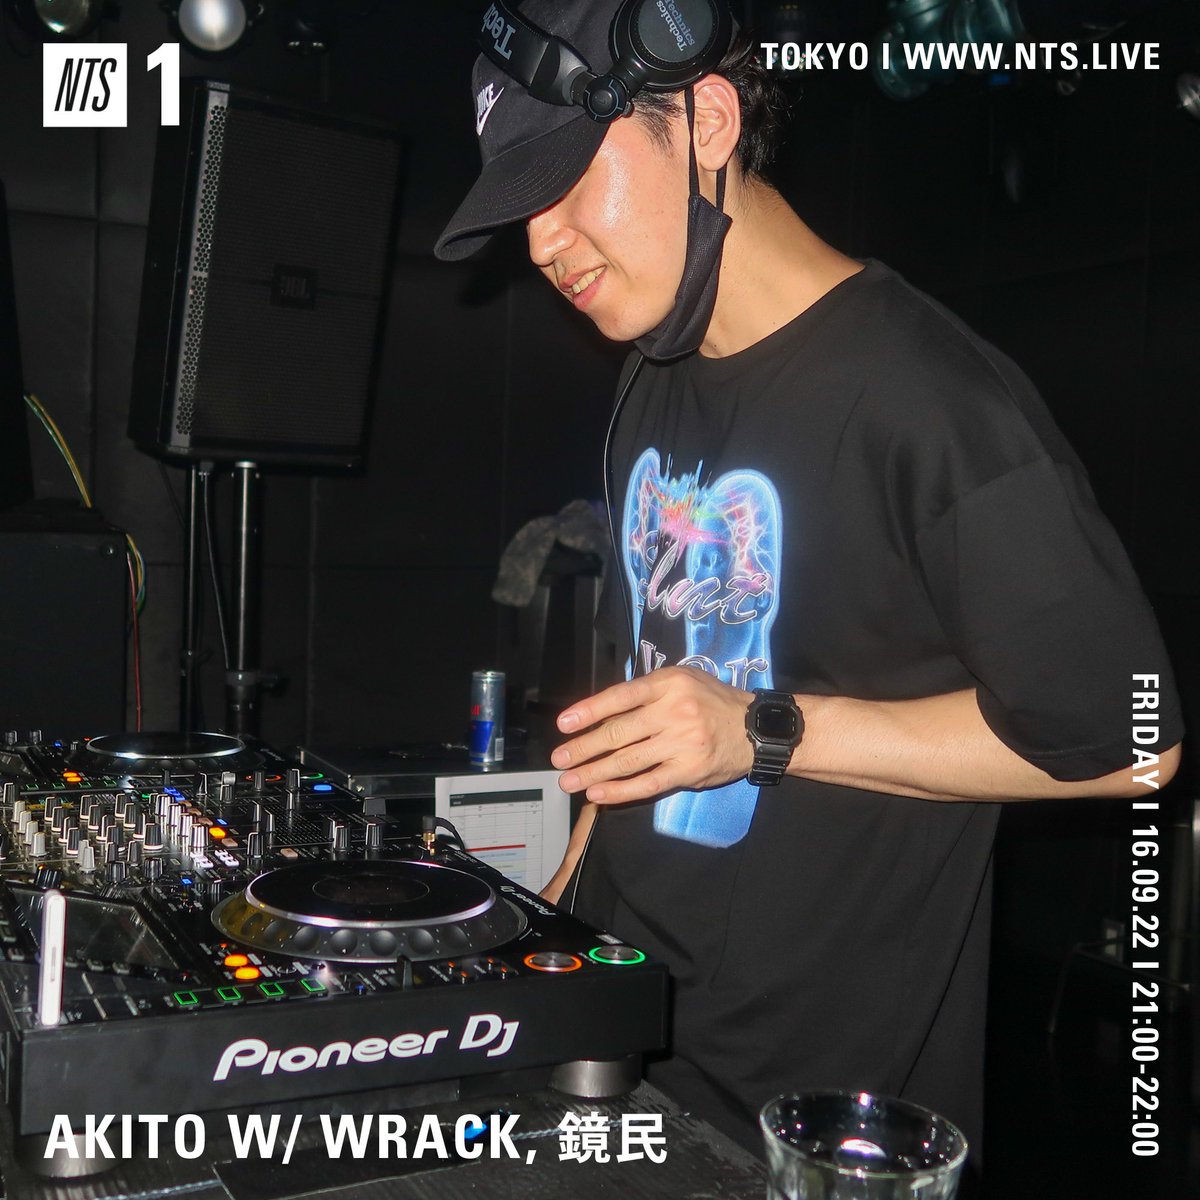 Tune in for @a_key_toe w/ 鏡民 and @WRACK90 rolling for the next 60 mins nts.live/1